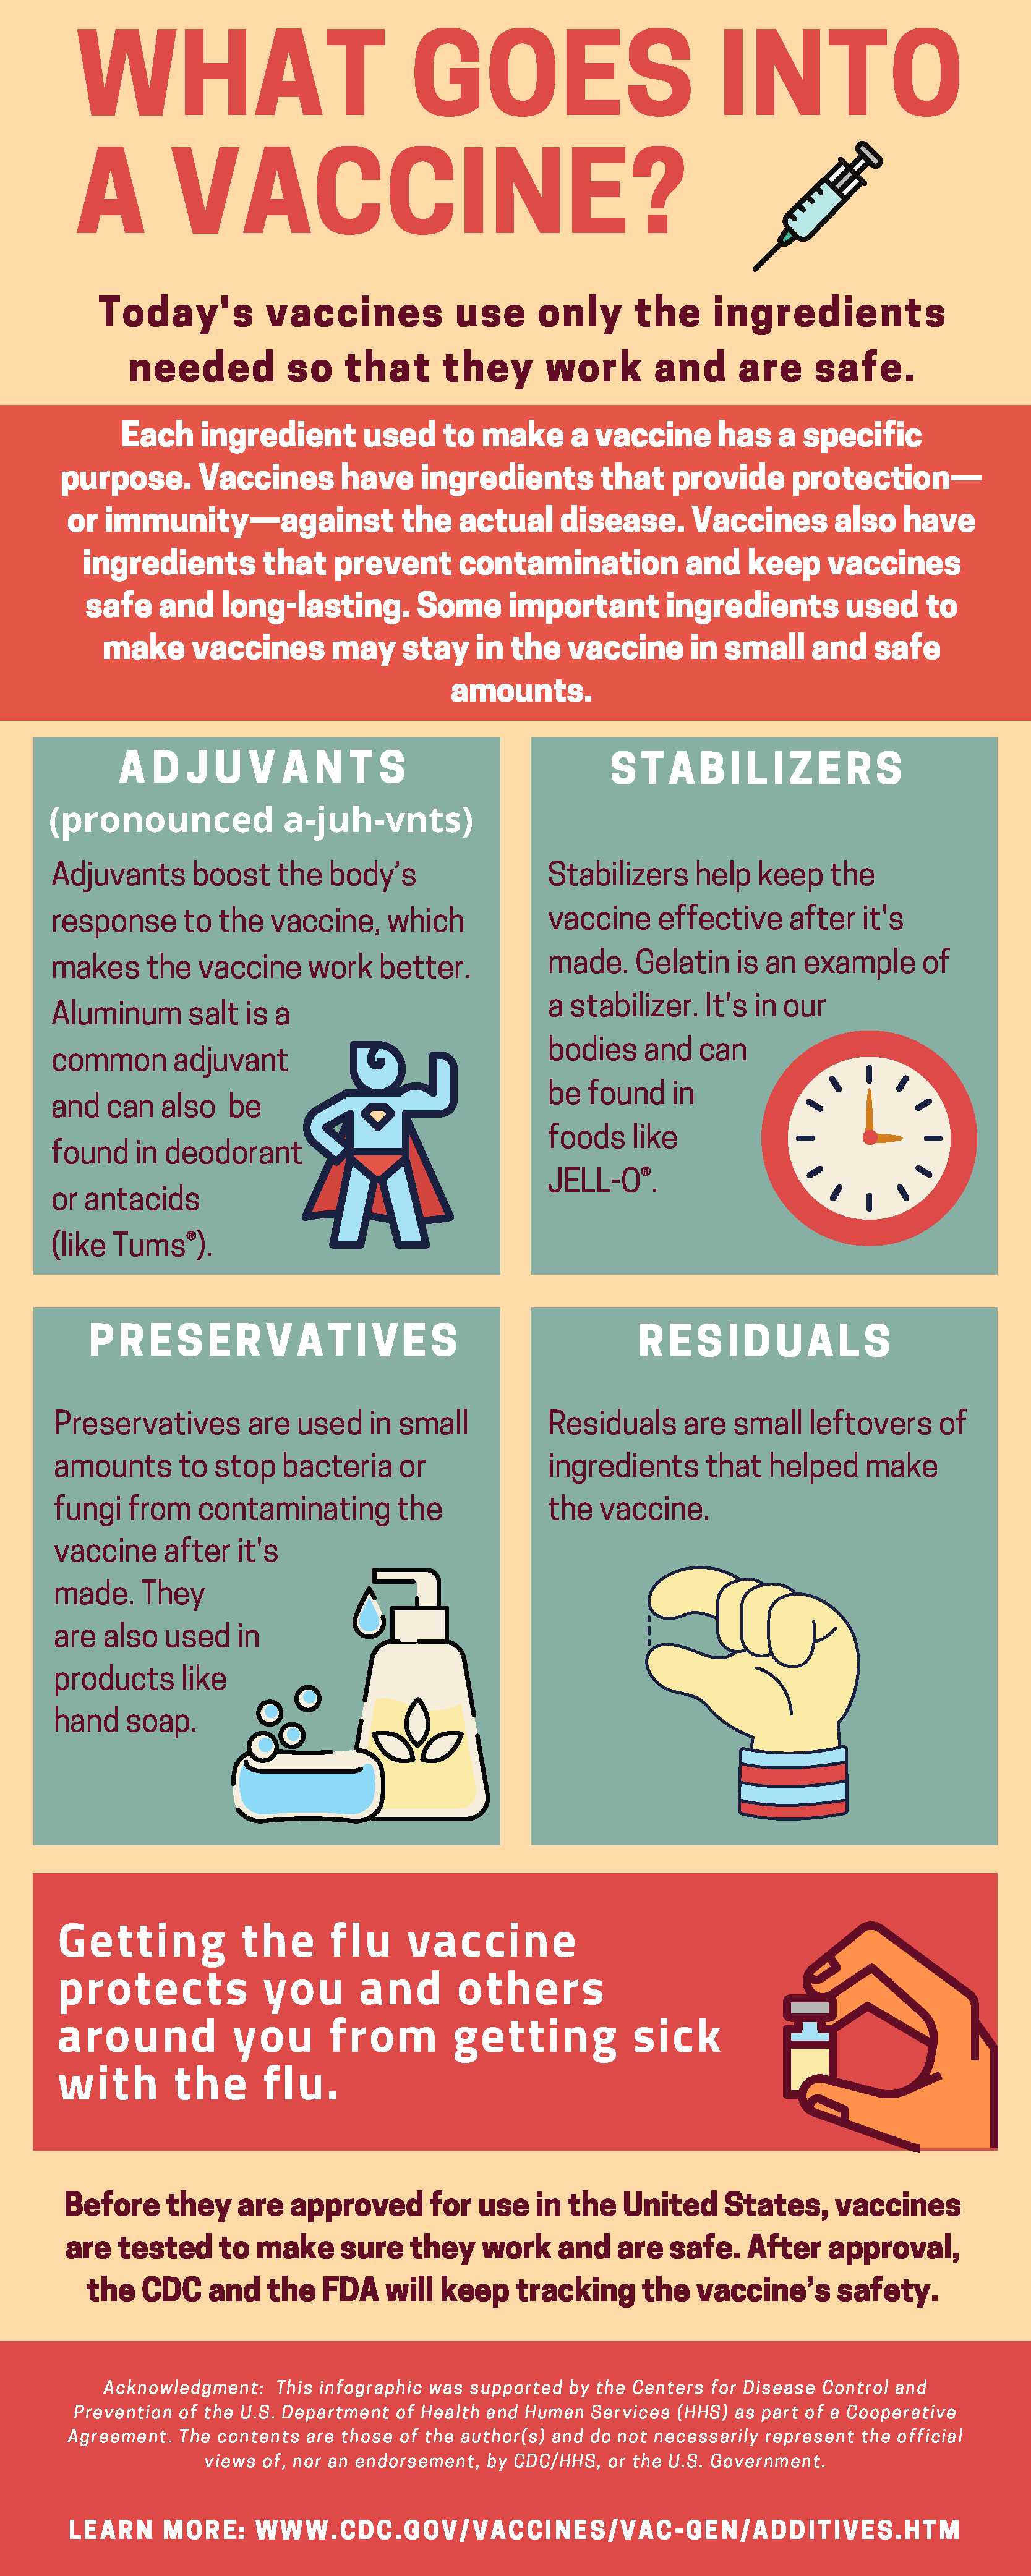 titles for essays about vaccines